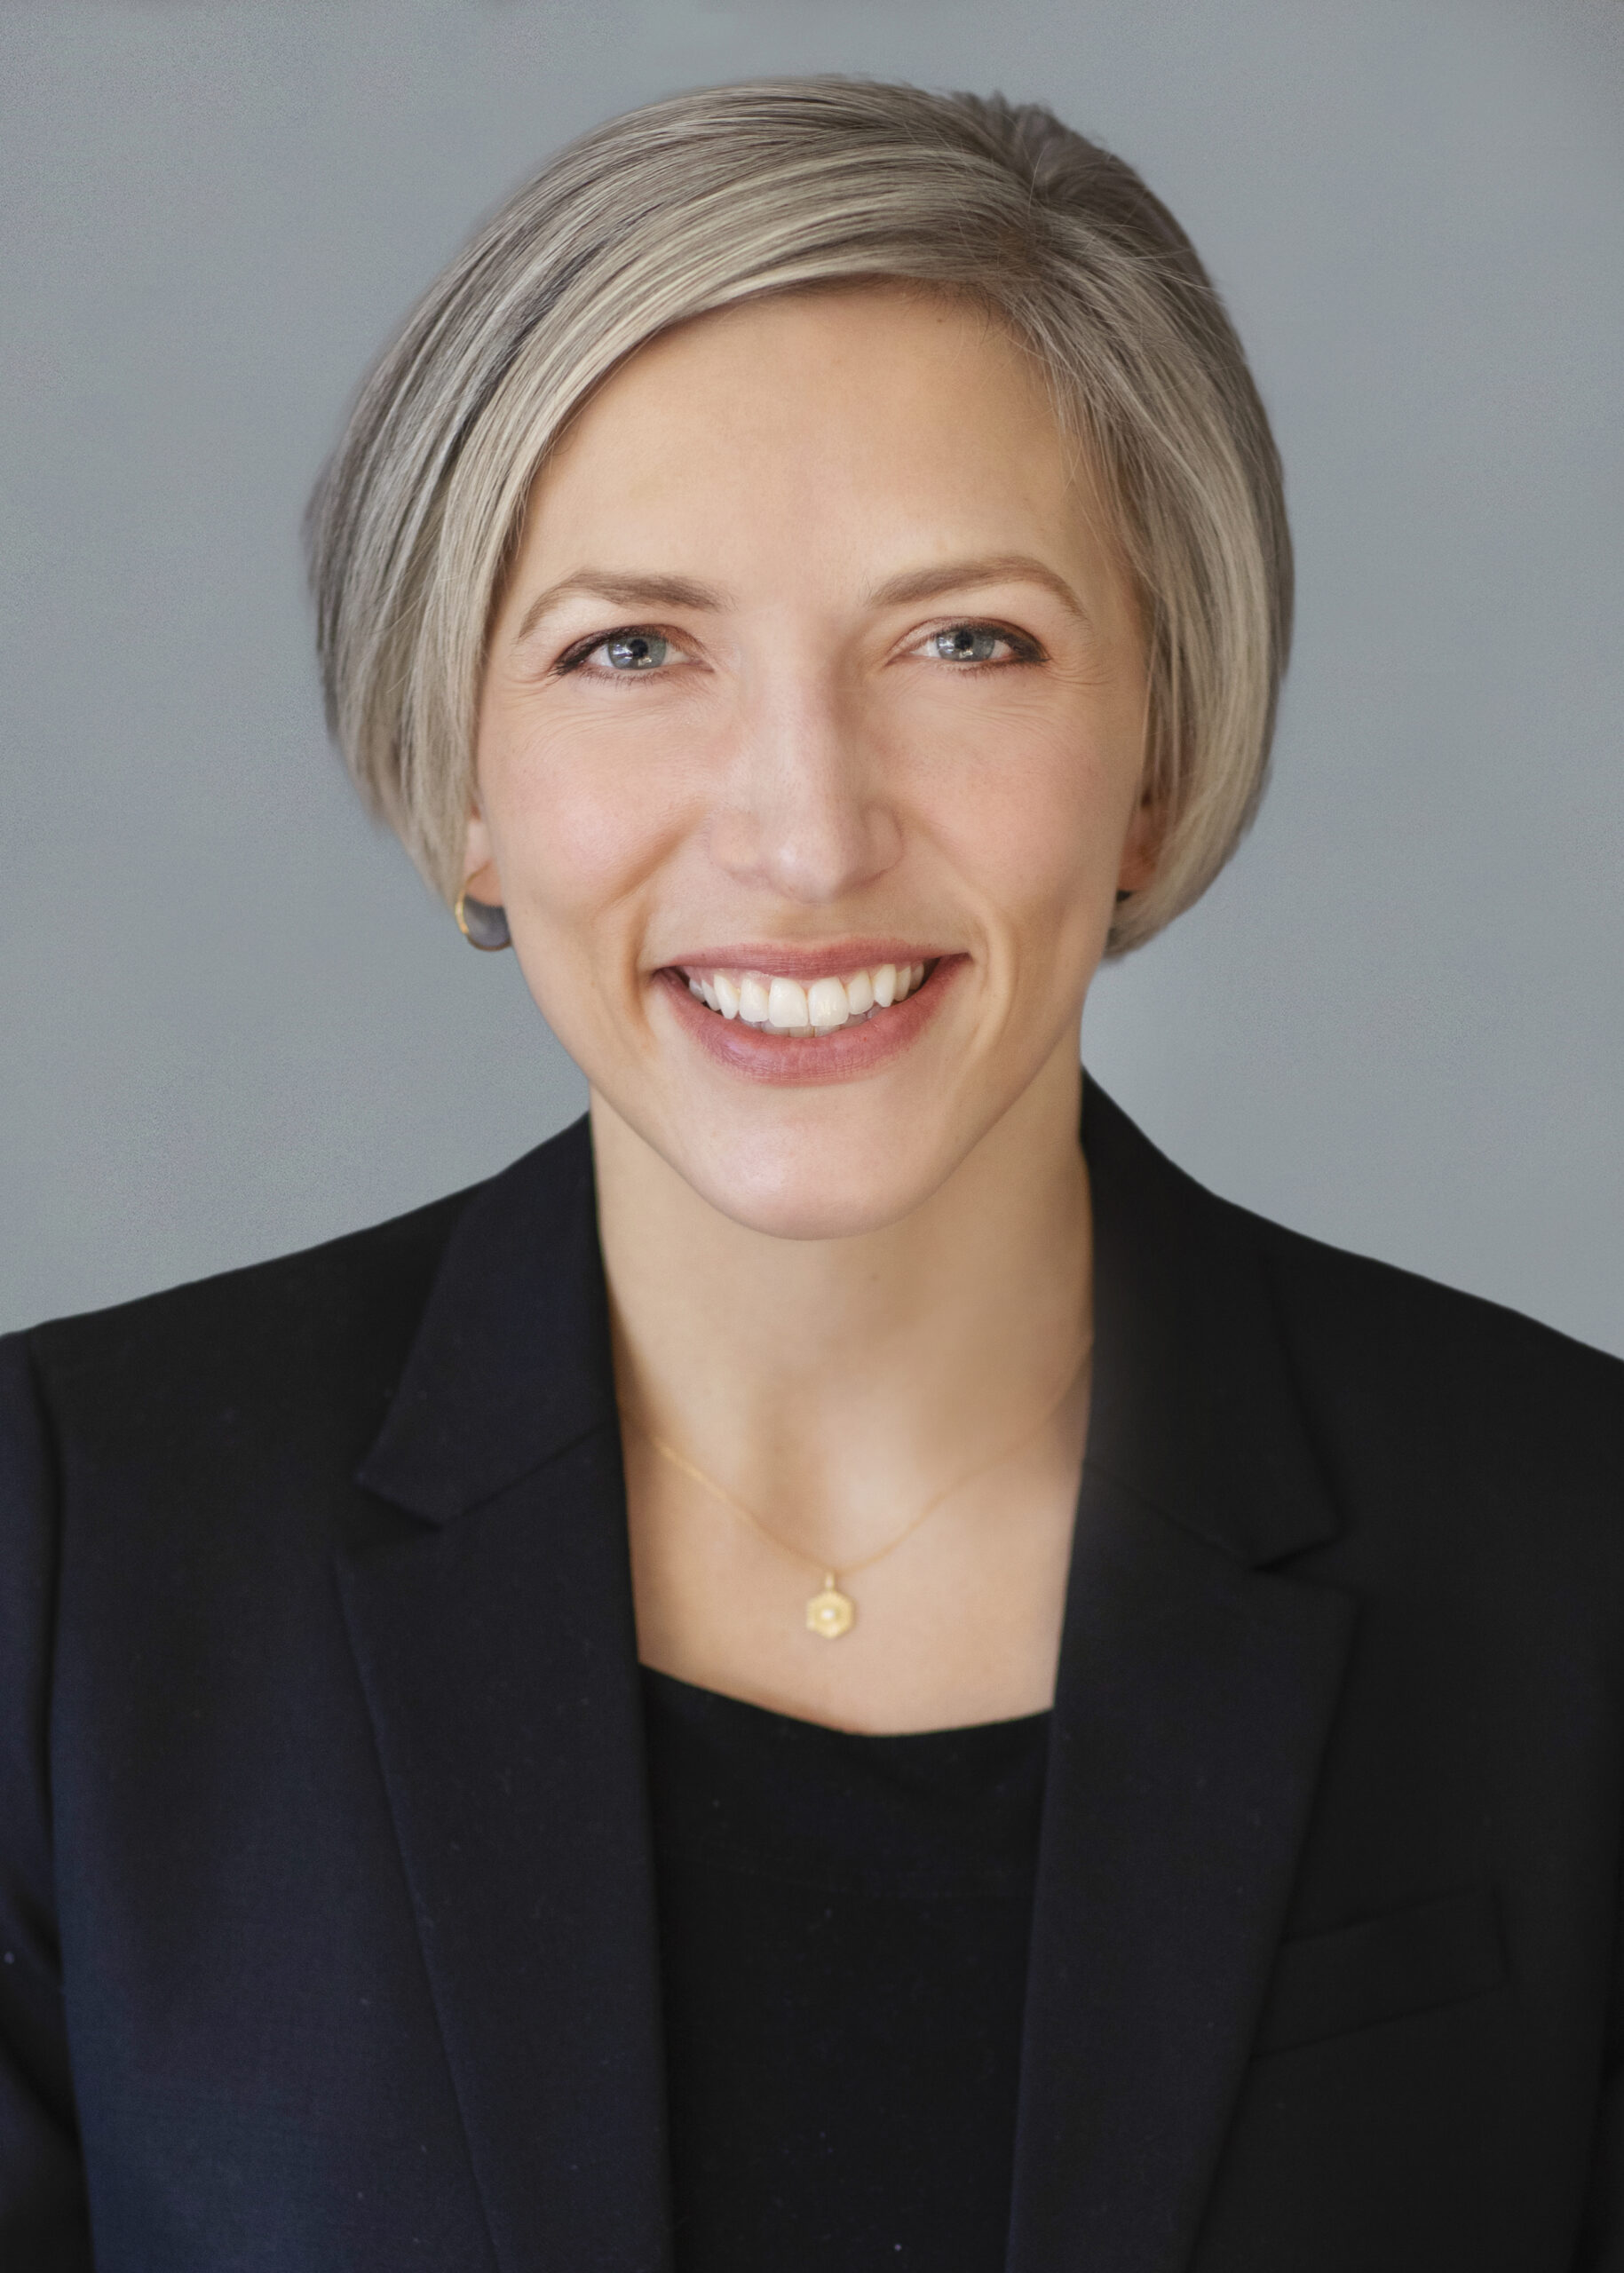 A professional headshot of a smiling woman with short silver hair, wearing a dark blazer and a small pendant necklace, set against a light blue background.